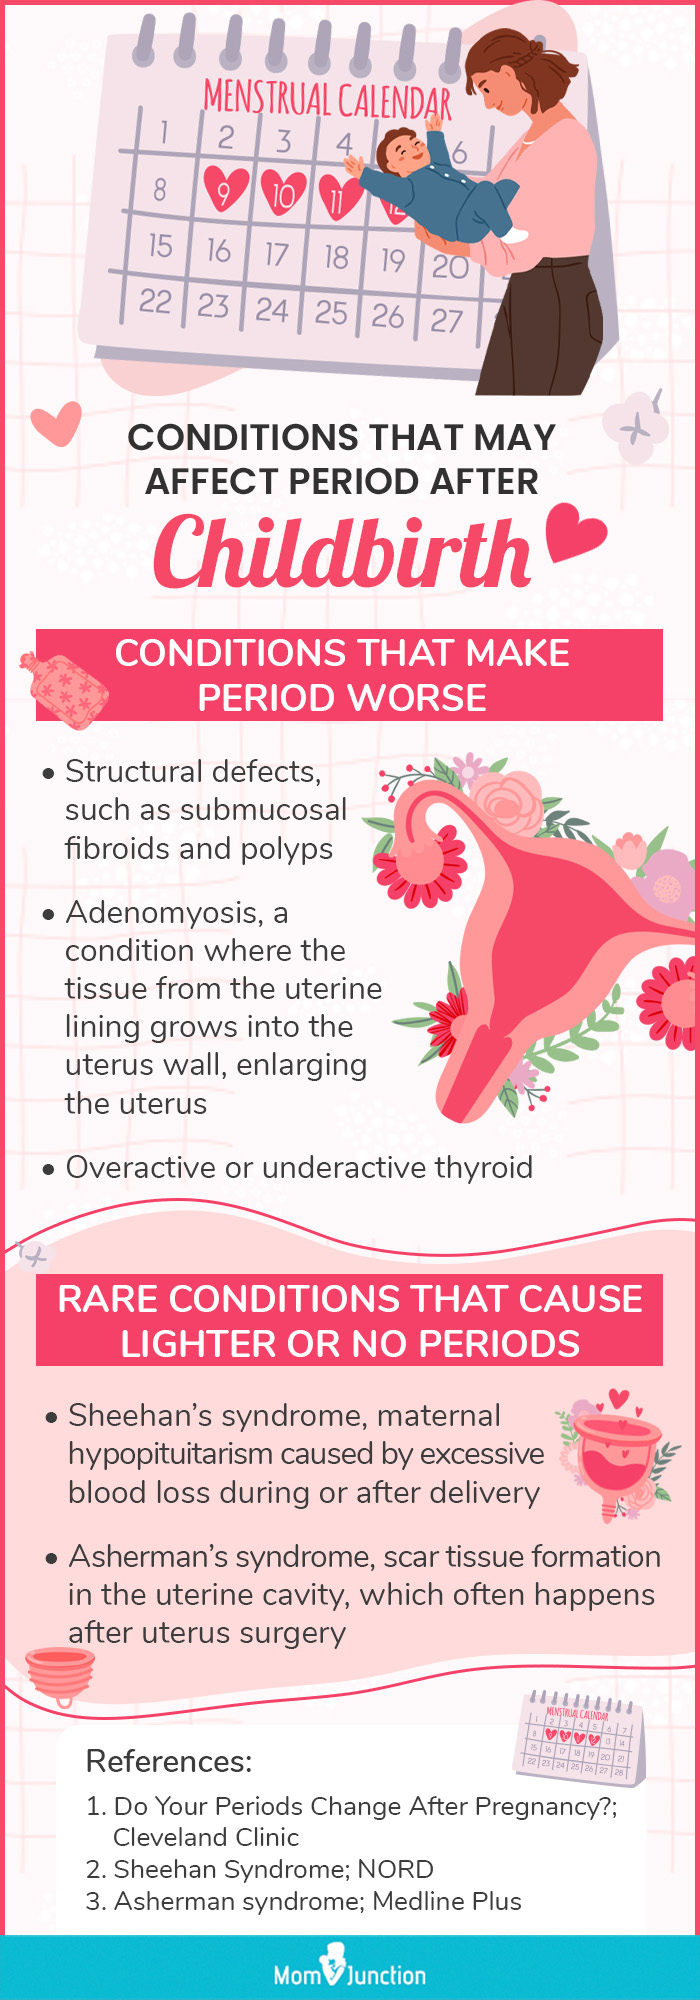 conditions that may affect period after childbirt (infographic)